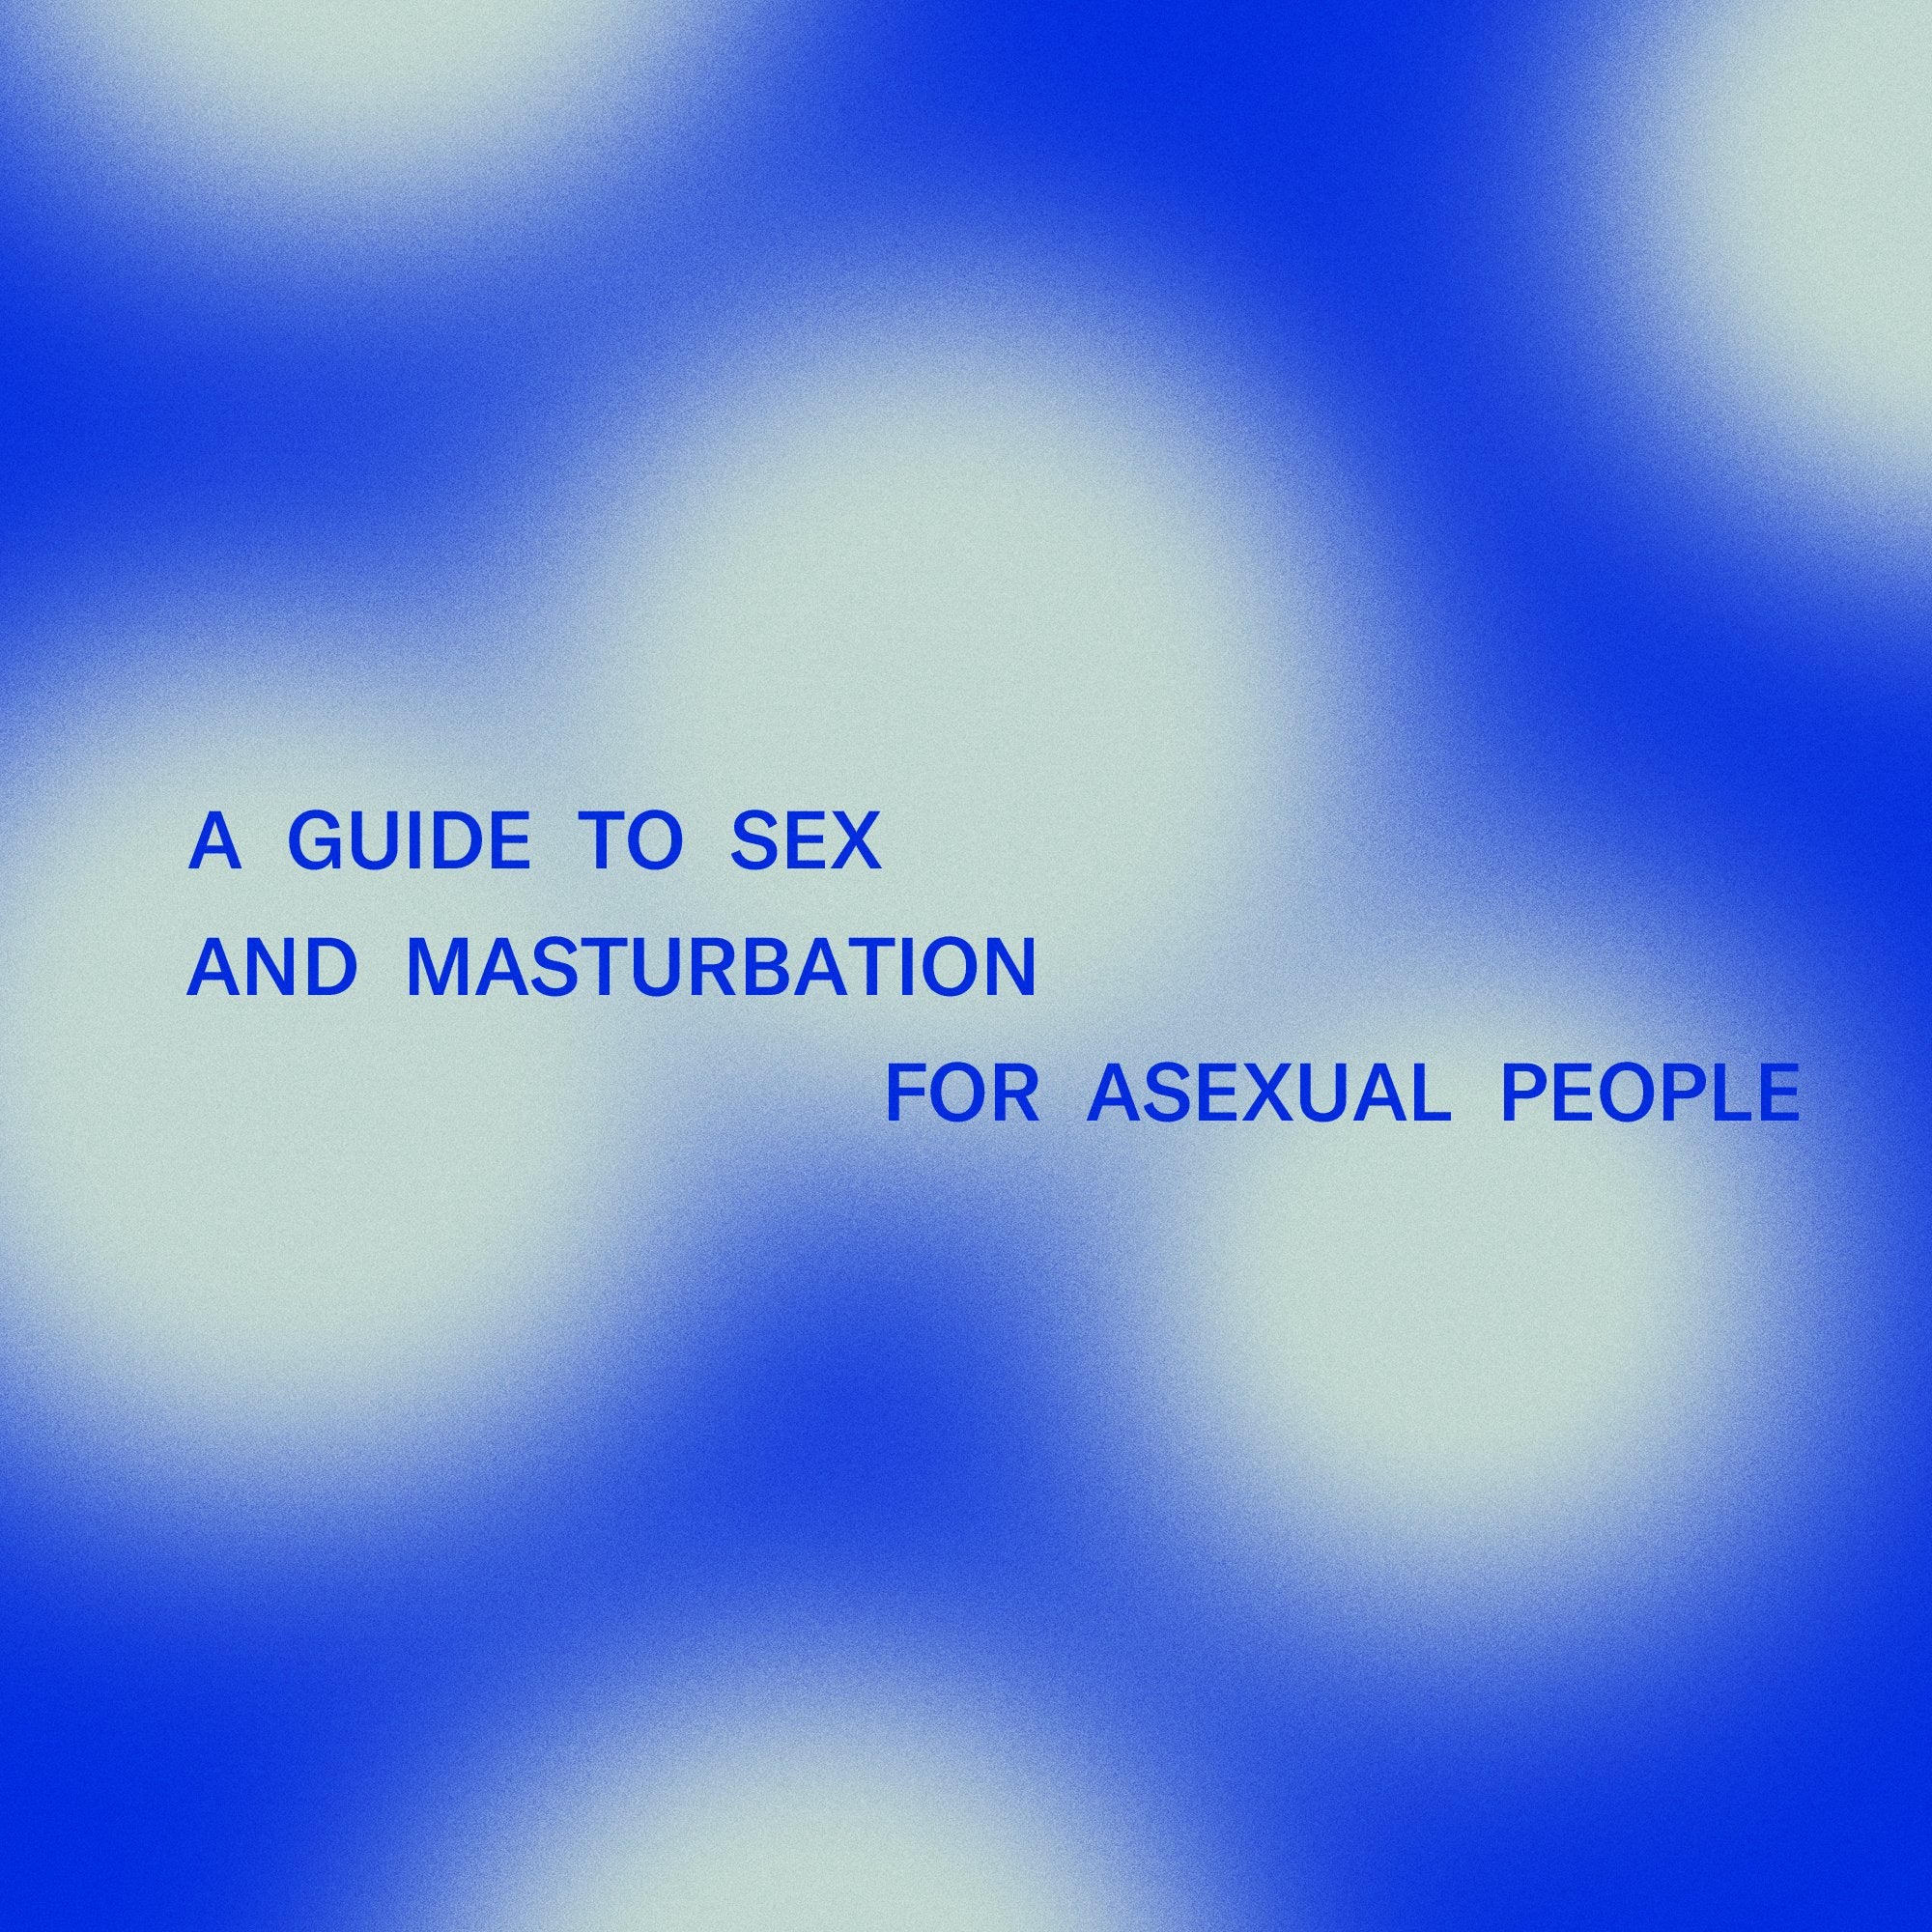 A Guide to Sex and Masturbation For Asexual People